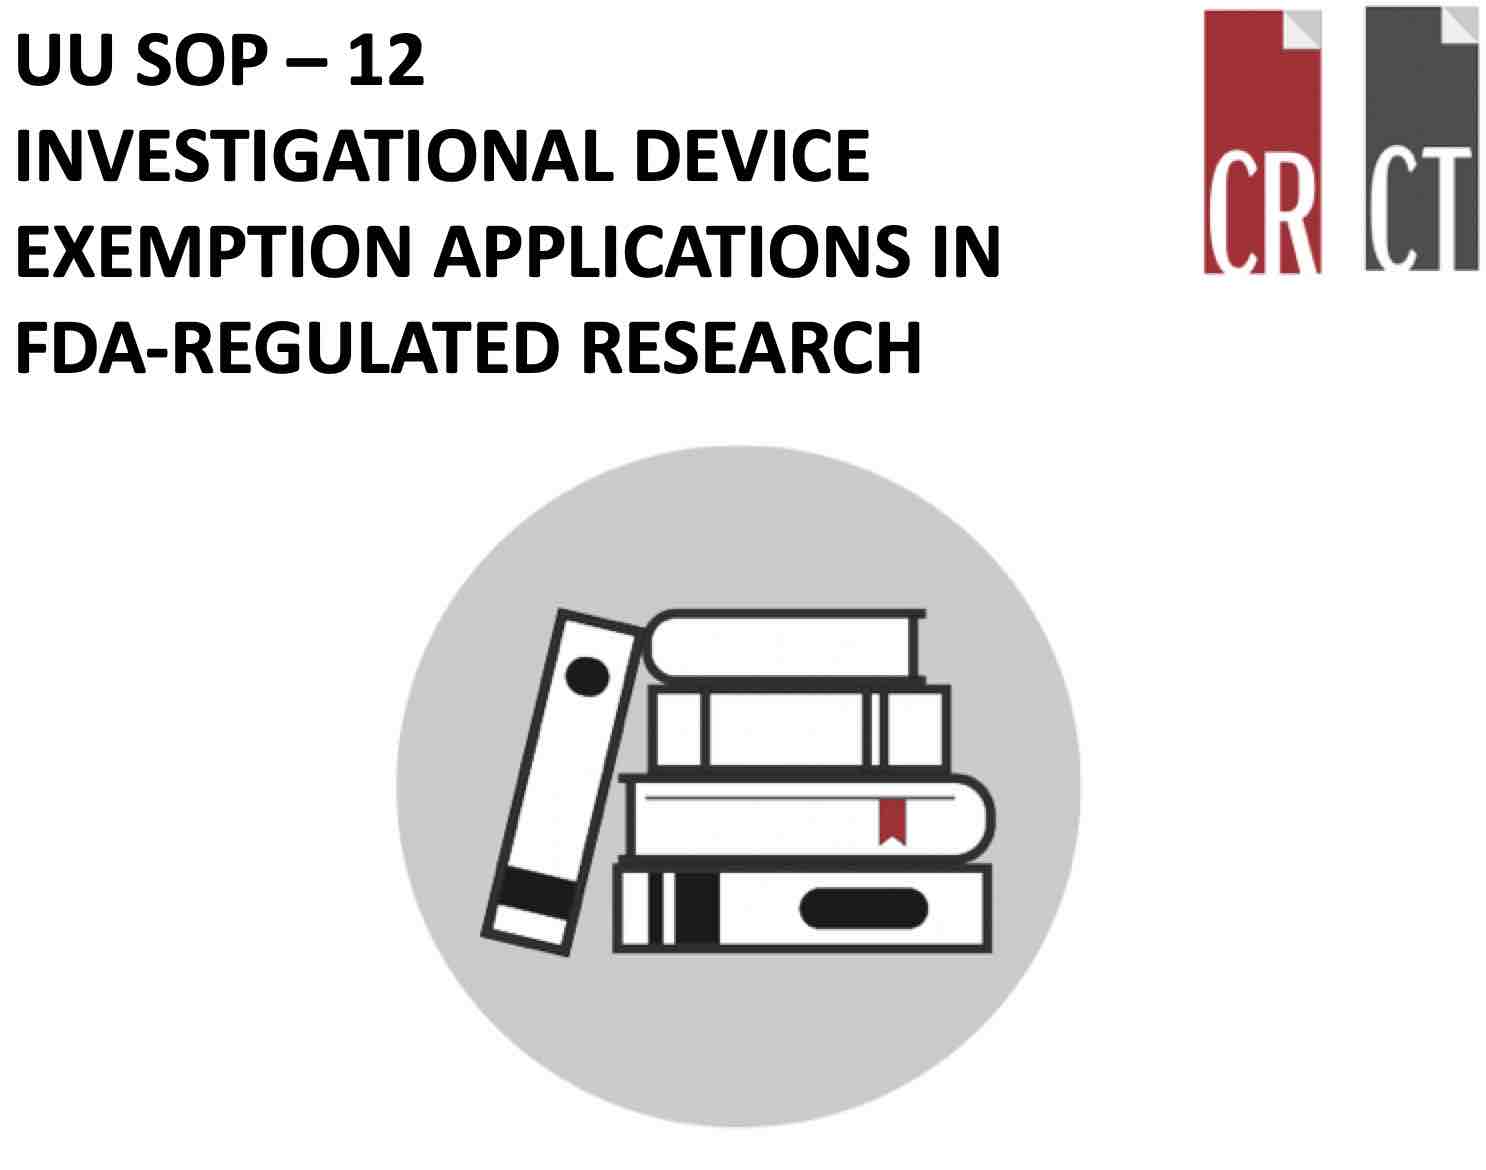 UUSOP 12 Investigational Device Exemption Applications in FDA-Regulated Research